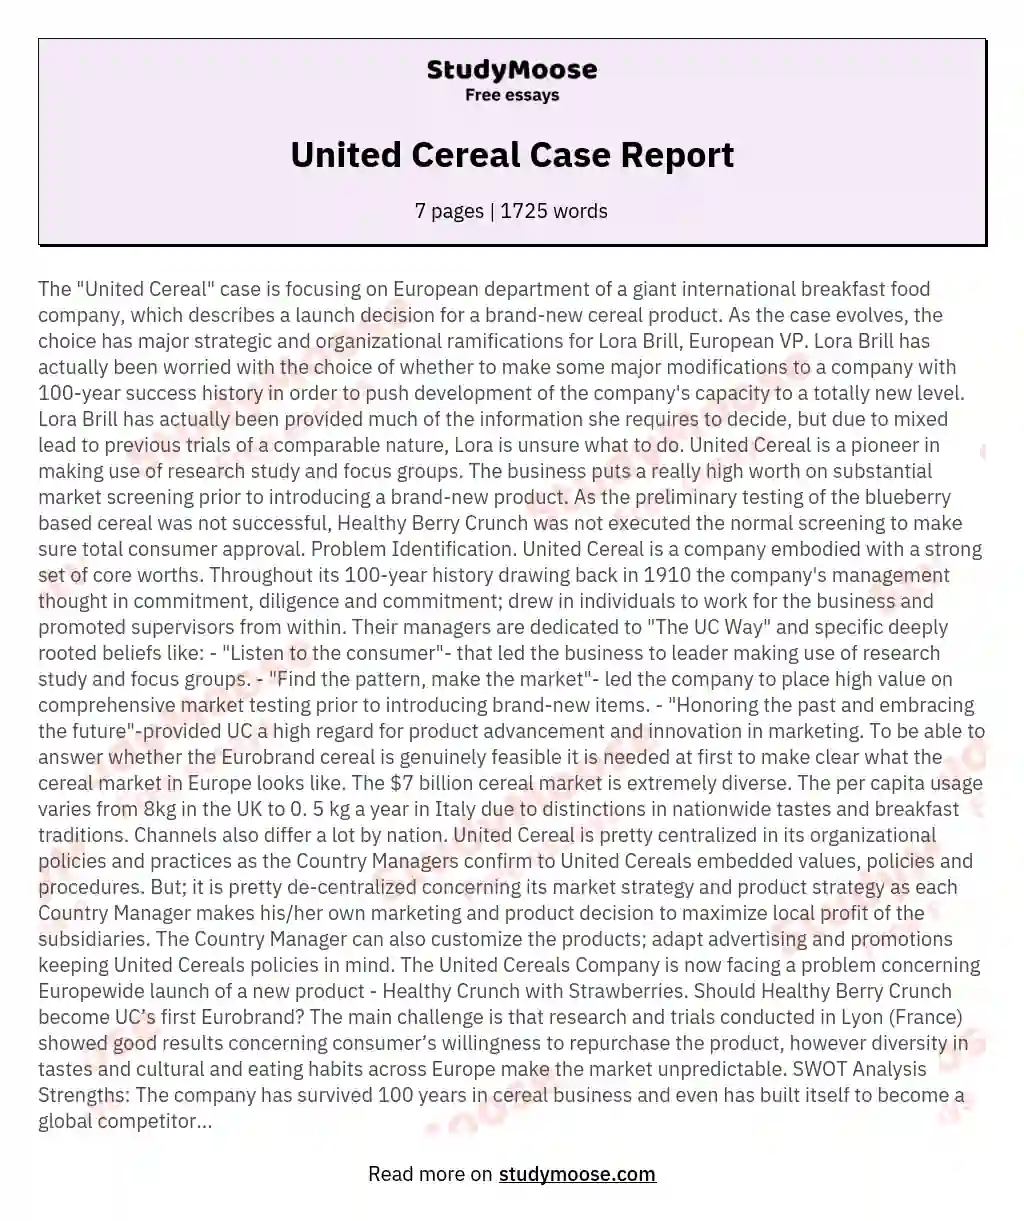 United Cereal Case Report